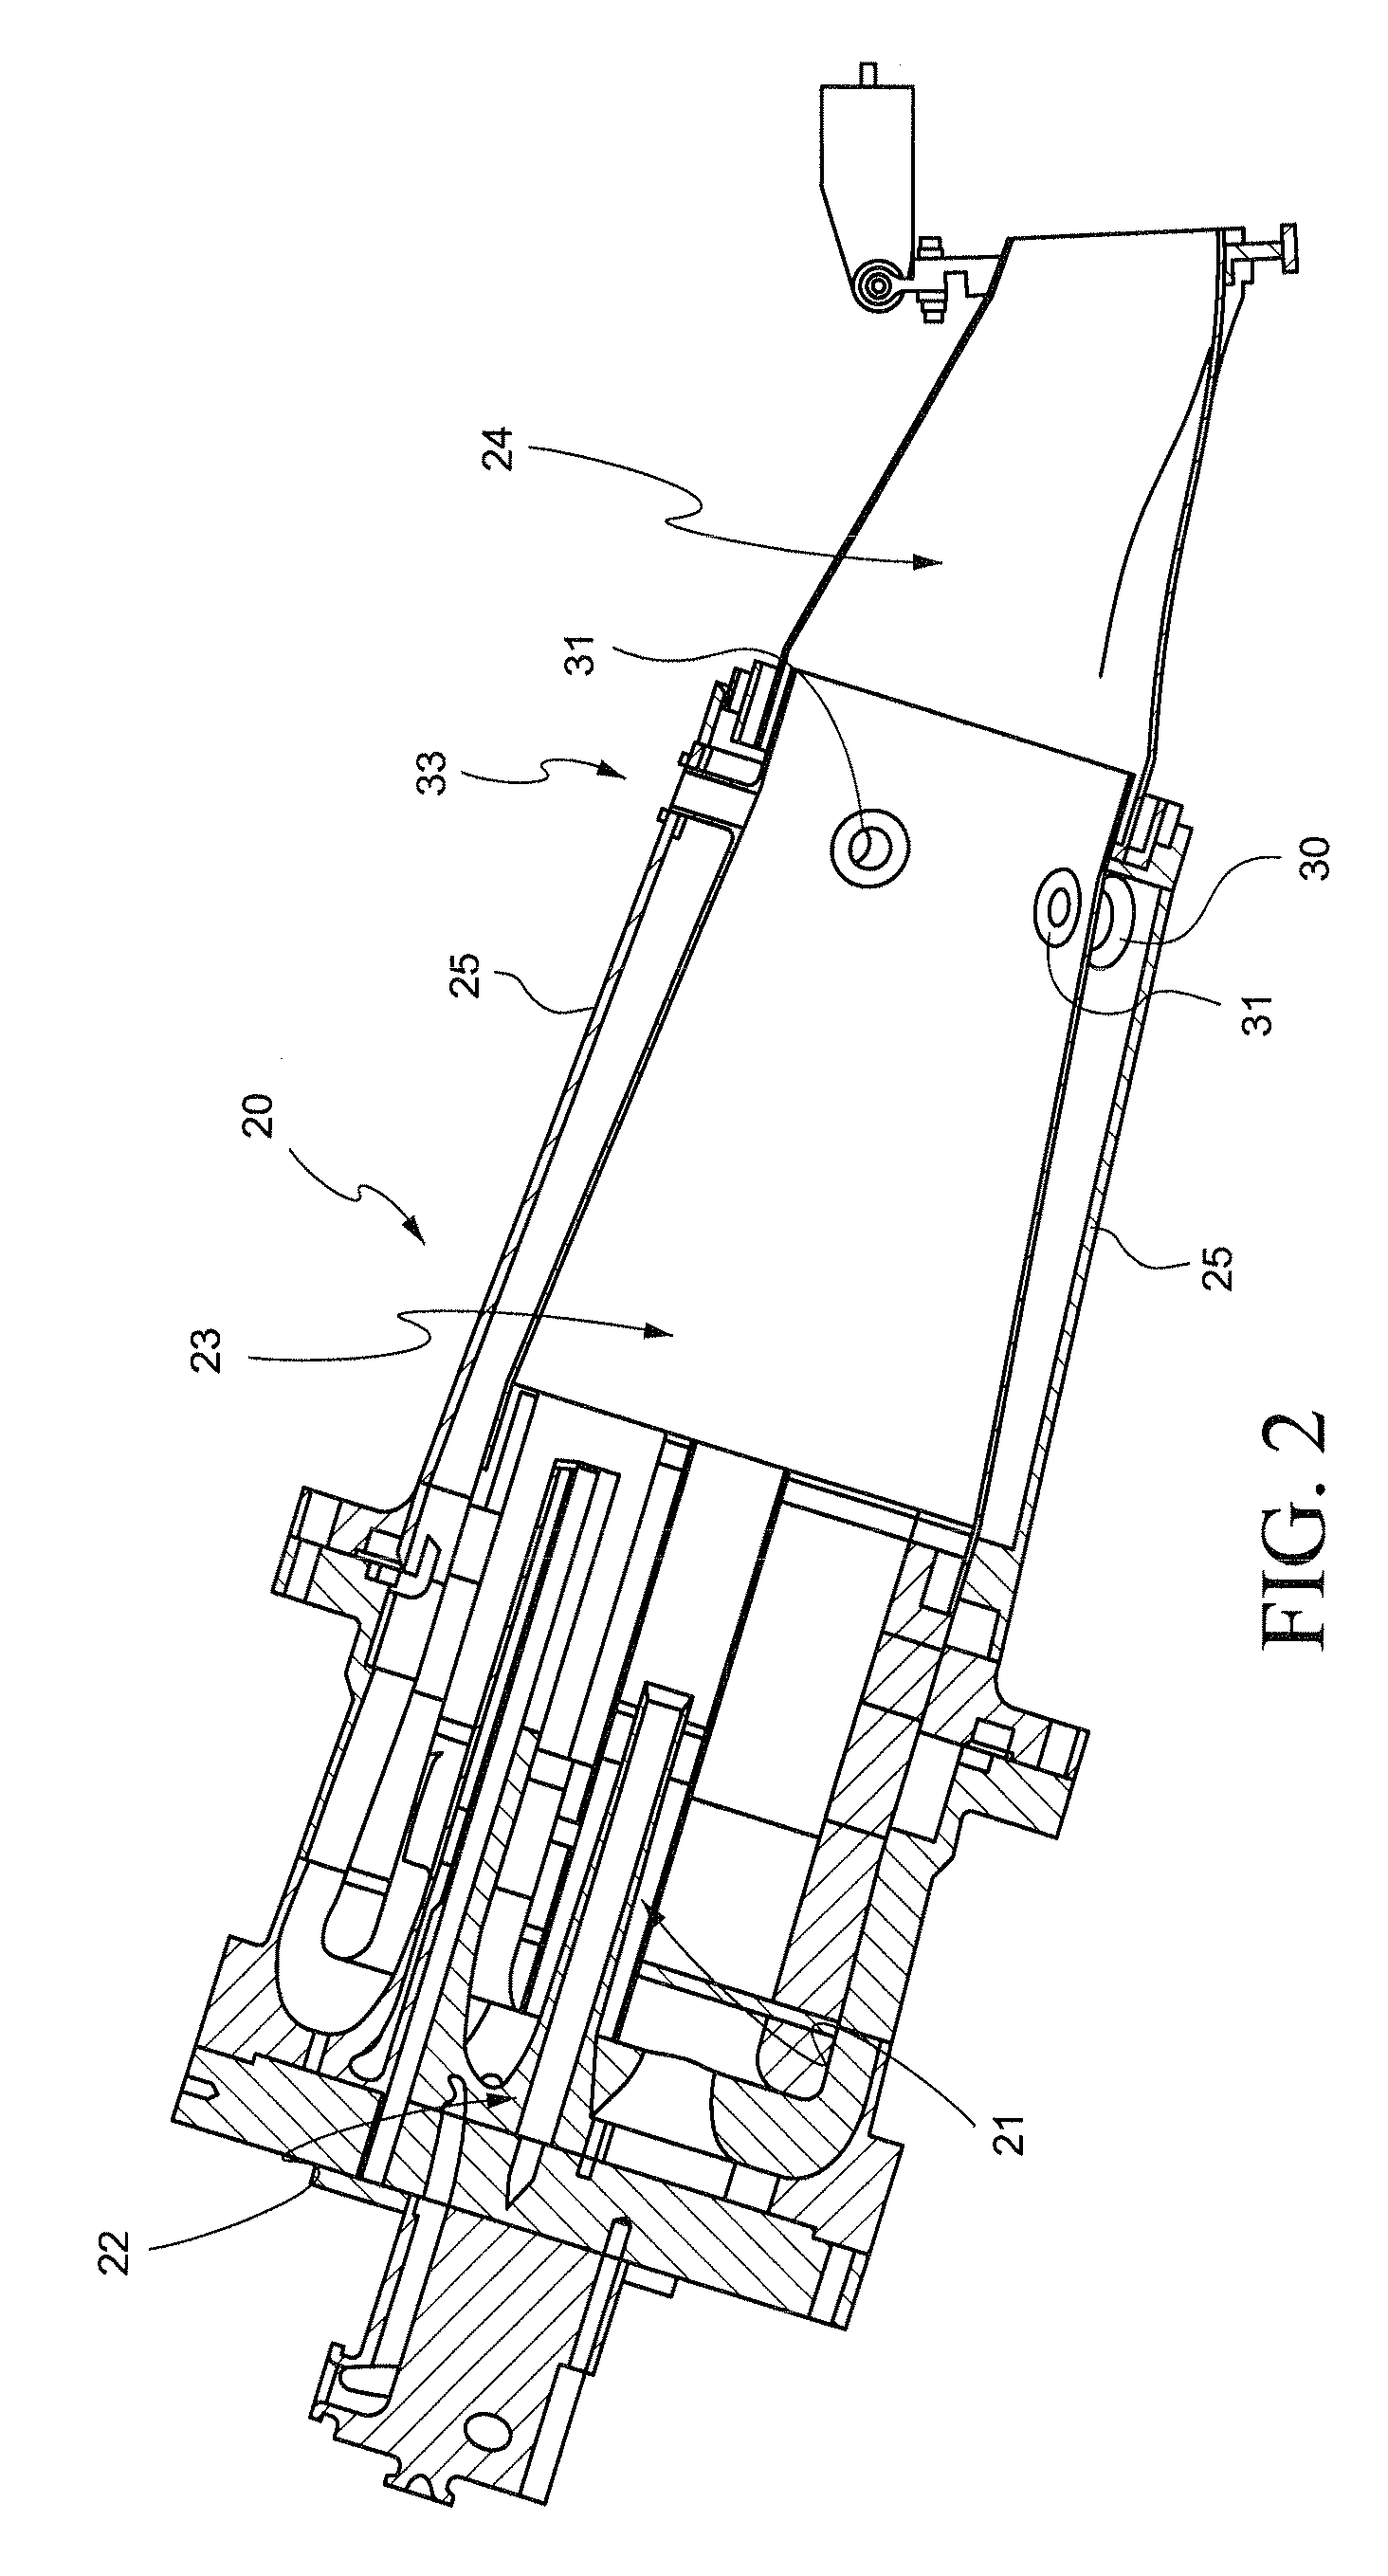 Integrated late lean injection on a combustion liner and late lean injection sleeve assembly